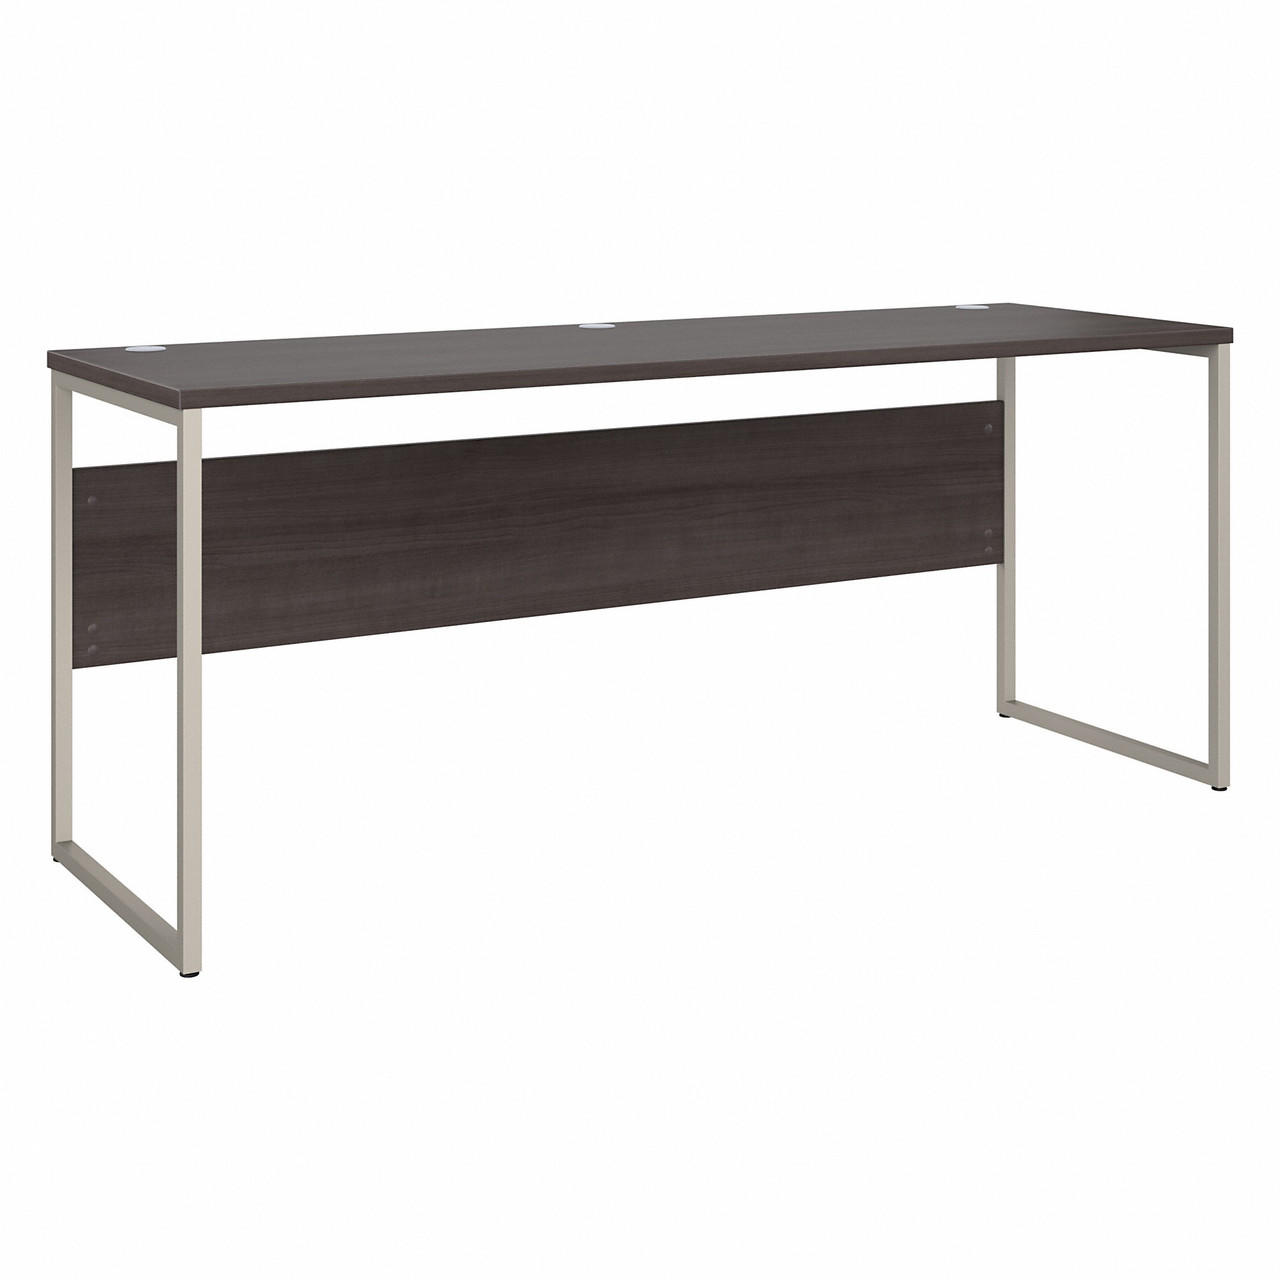  Bush Business Furniture Hybrid 60W x 30D Computer Table Desk with Metal Legs 